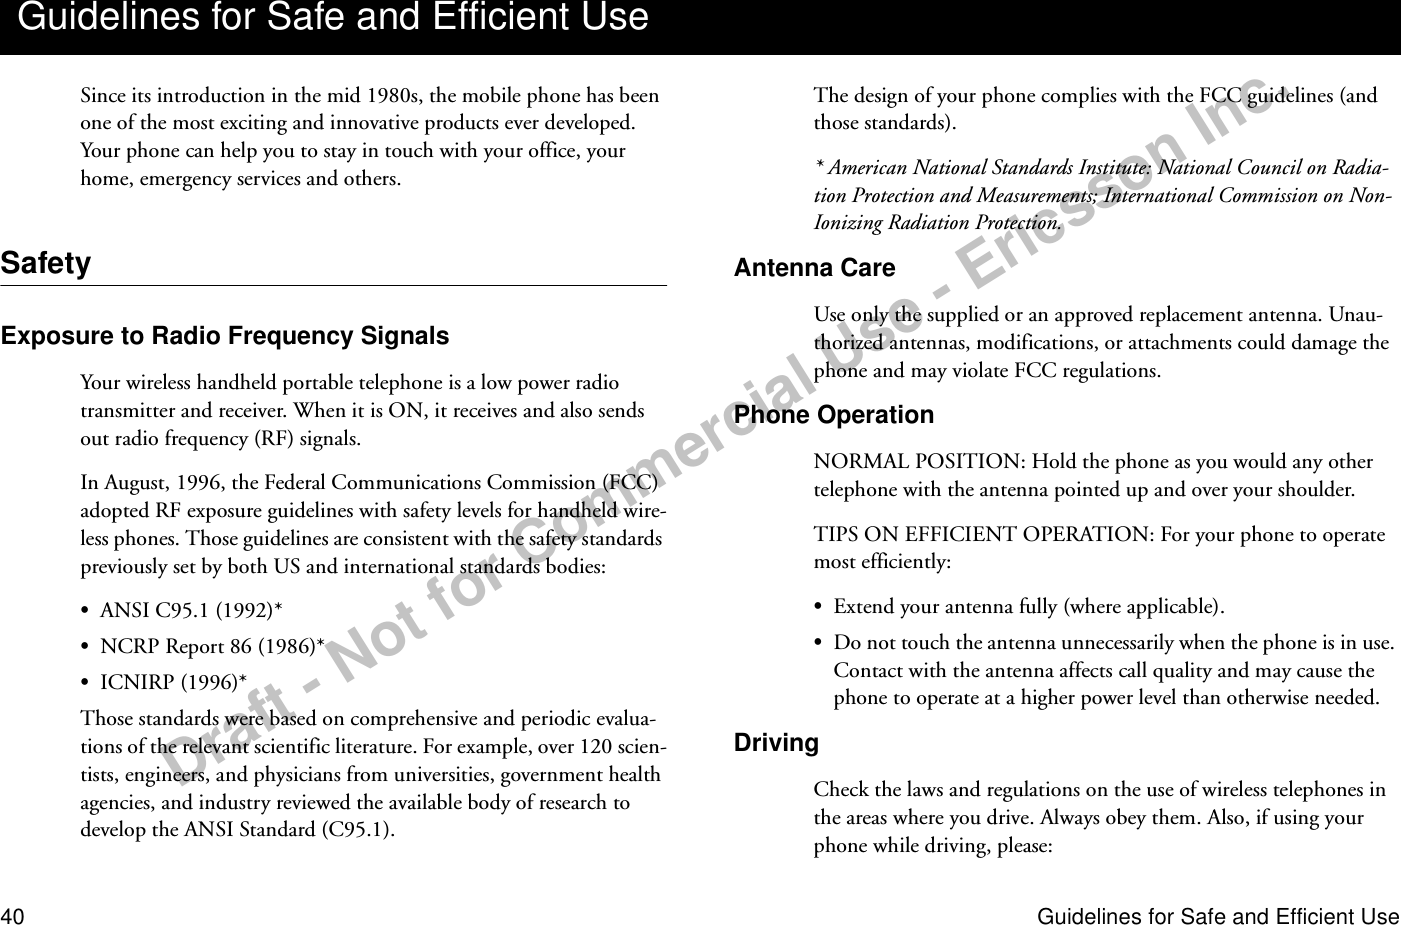 Draft - Not for Commercial Use - Ericsson Inc.40 Guidelines for Safe and Efficient UseSince its introduction in the mid 1980s, the mobile phone has been one of the most exciting and innovative products ever developed. Your phone can help you to stay in touch with your office, your home, emergency services and others.SafetyExposure to Radio Frequency SignalsYour wireless handheld portable telephone is a low power radio transmitter and receiver. When it is ON, it receives and also sends out radio frequency (RF) signals.In August, 1996, the Federal Communications Commission (FCC) adopted RF exposure guidelines with safety levels for handheld wire-less phones. Those guidelines are consistent with the safety standards previously set by both US and international standards bodies:•ANSI C95.1 (1992)*•NCRP Report 86 (1986)*•ICNIRP (1996)*Those standards were based on comprehensive and periodic evalua-tions of the relevant scientific literature. For example, over 120 scien-tists, engineers, and physicians from universities, government health agencies, and industry reviewed the available body of research to develop the ANSI Standard (C95.1).The design of your phone complies with the FCC guidelines (and those standards).* American National Standards Institute: National Council on Radia-tion Protection and Measurements; International Commission on Non-Ionizing Radiation Protection.Antenna CareUse only the supplied or an approved replacement antenna. Unau-thorized antennas, modifications, or attachments could damage the phone and may violate FCC regulations.Phone OperationNORMAL POSITION: Hold the phone as you would any other telephone with the antenna pointed up and over your shoulder.TIPS ON EFFICIENT OPERATION: For your phone to operate most efficiently:•Extend your antenna fully (where applicable).•Do not touch the antenna unnecessarily when the phone is in use. Contact with the antenna affects call quality and may cause the phone to operate at a higher power level than otherwise needed.DrivingCheck the laws and regulations on the use of wireless telephones in the areas where you drive. Always obey them. Also, if using your phone while driving, please:Guidelines for Safe and Efficient Use